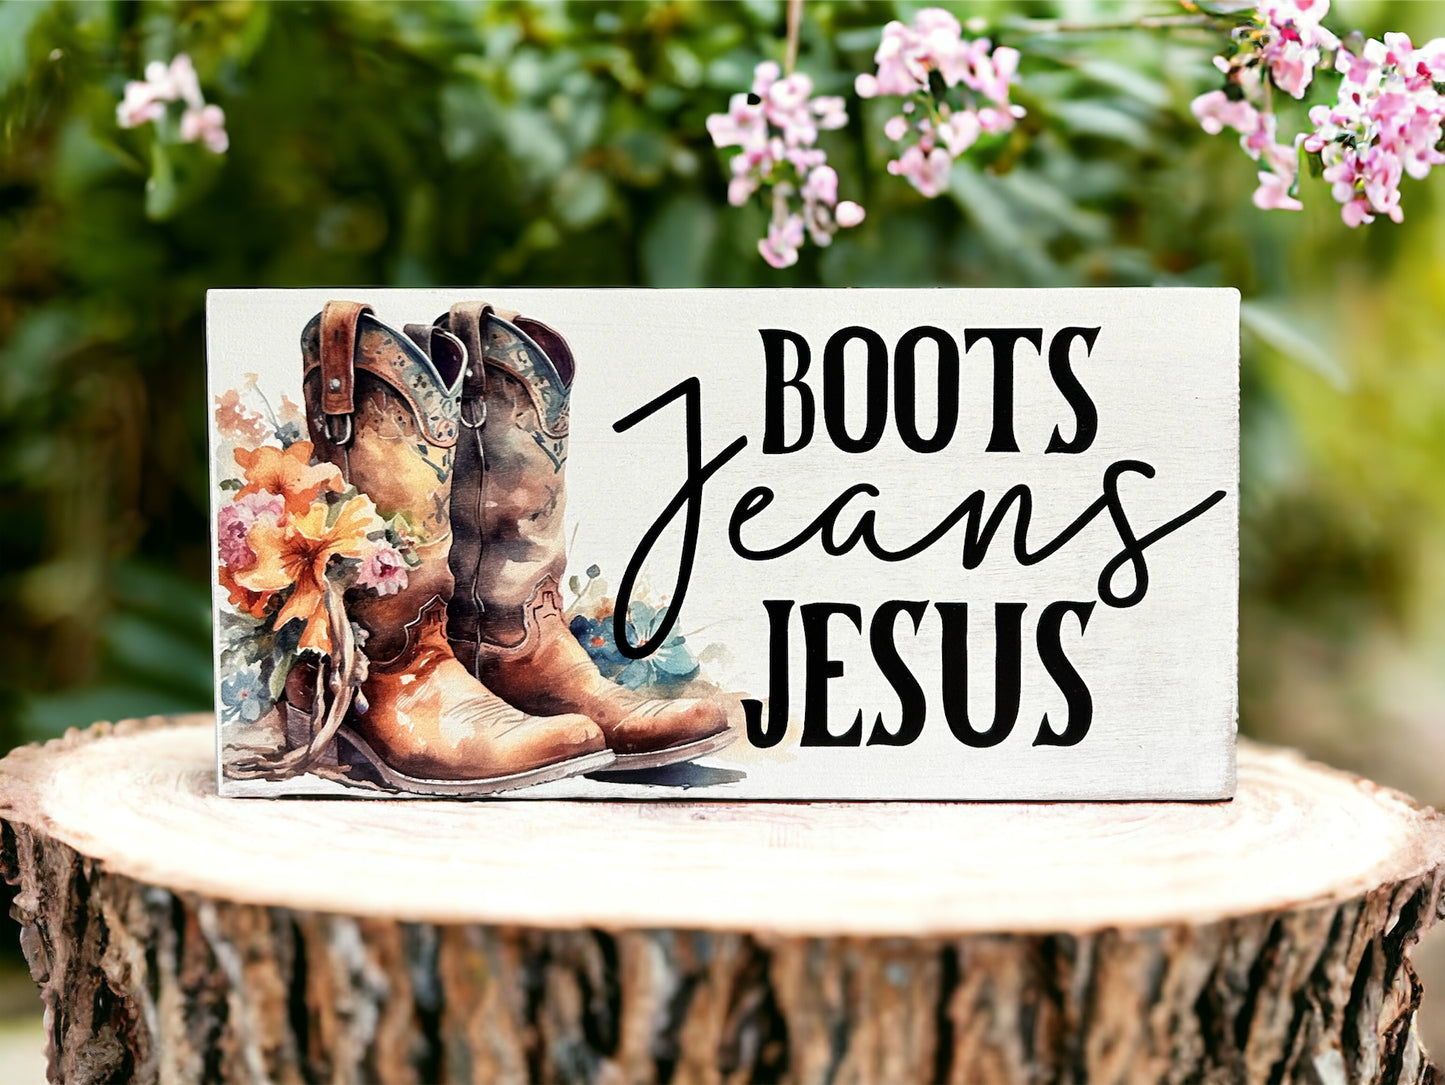 Boots, Jesus, Jeans -  Rustic Country Wood Sign